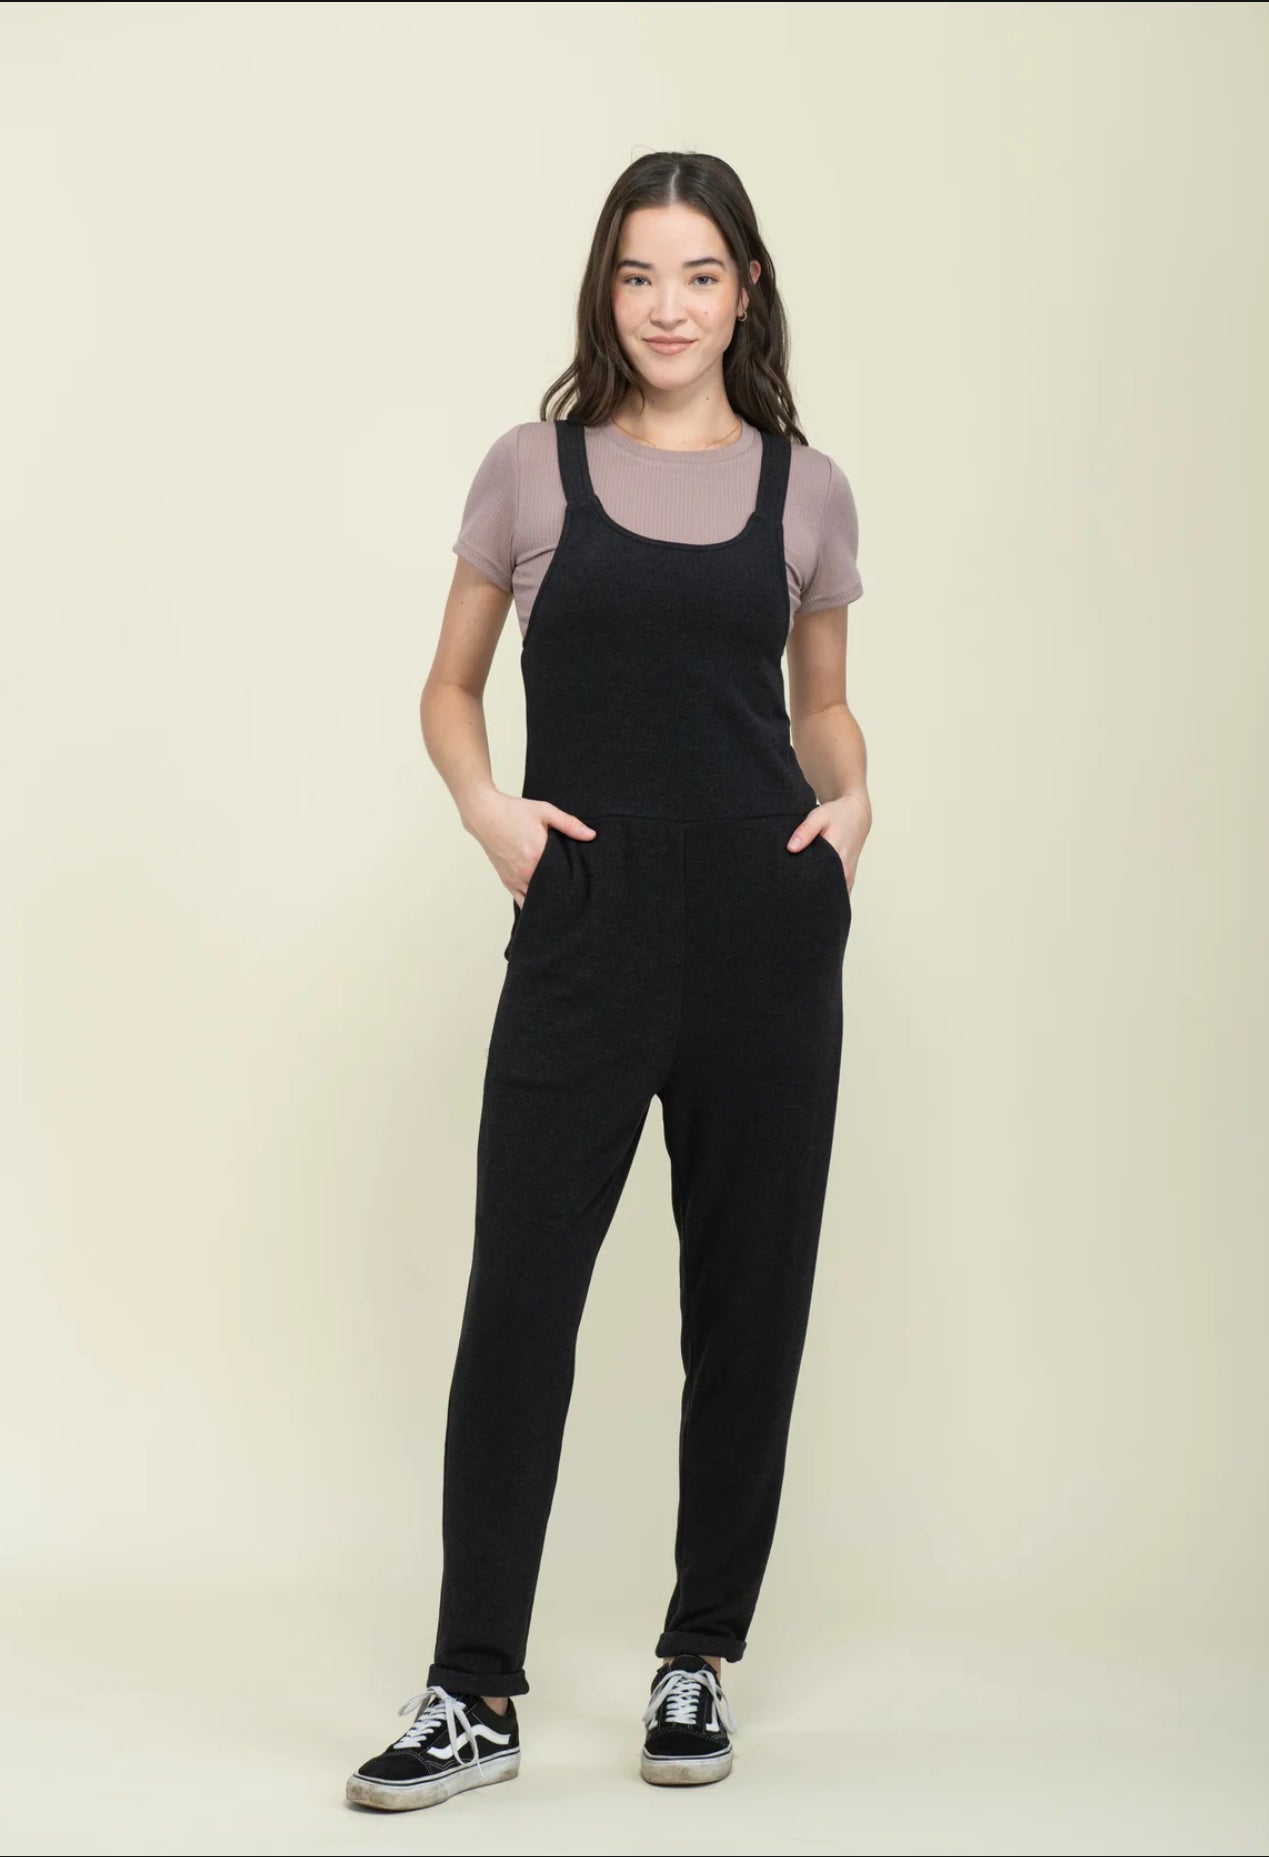 Kay brushed jersey overalls by Orb - Black - Blue Sky Fashions & Lingerie